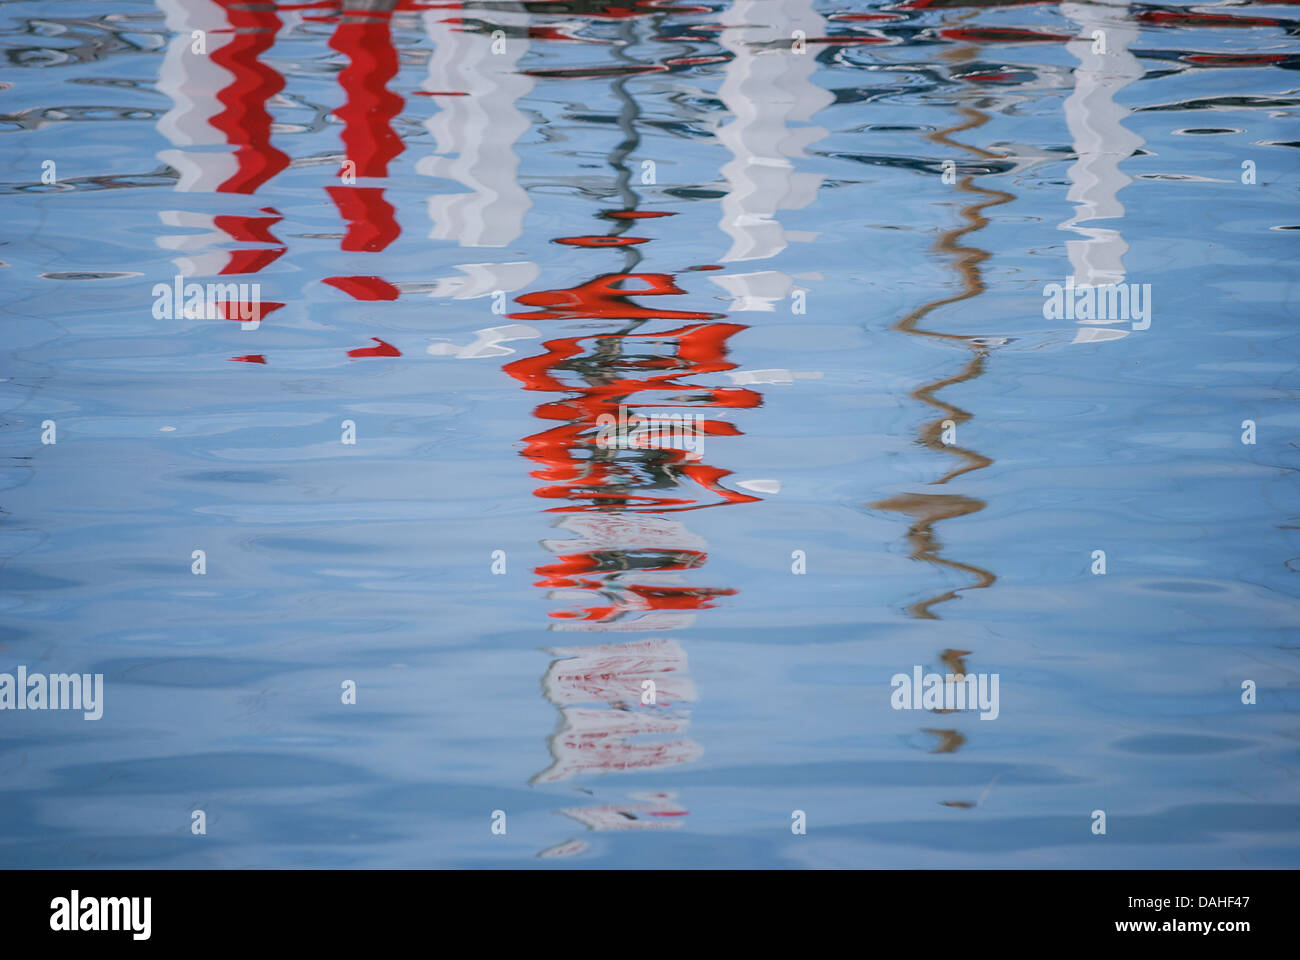 Abstract images of reflections of a boat marina in the rippling water of a harbour. Stock Photo